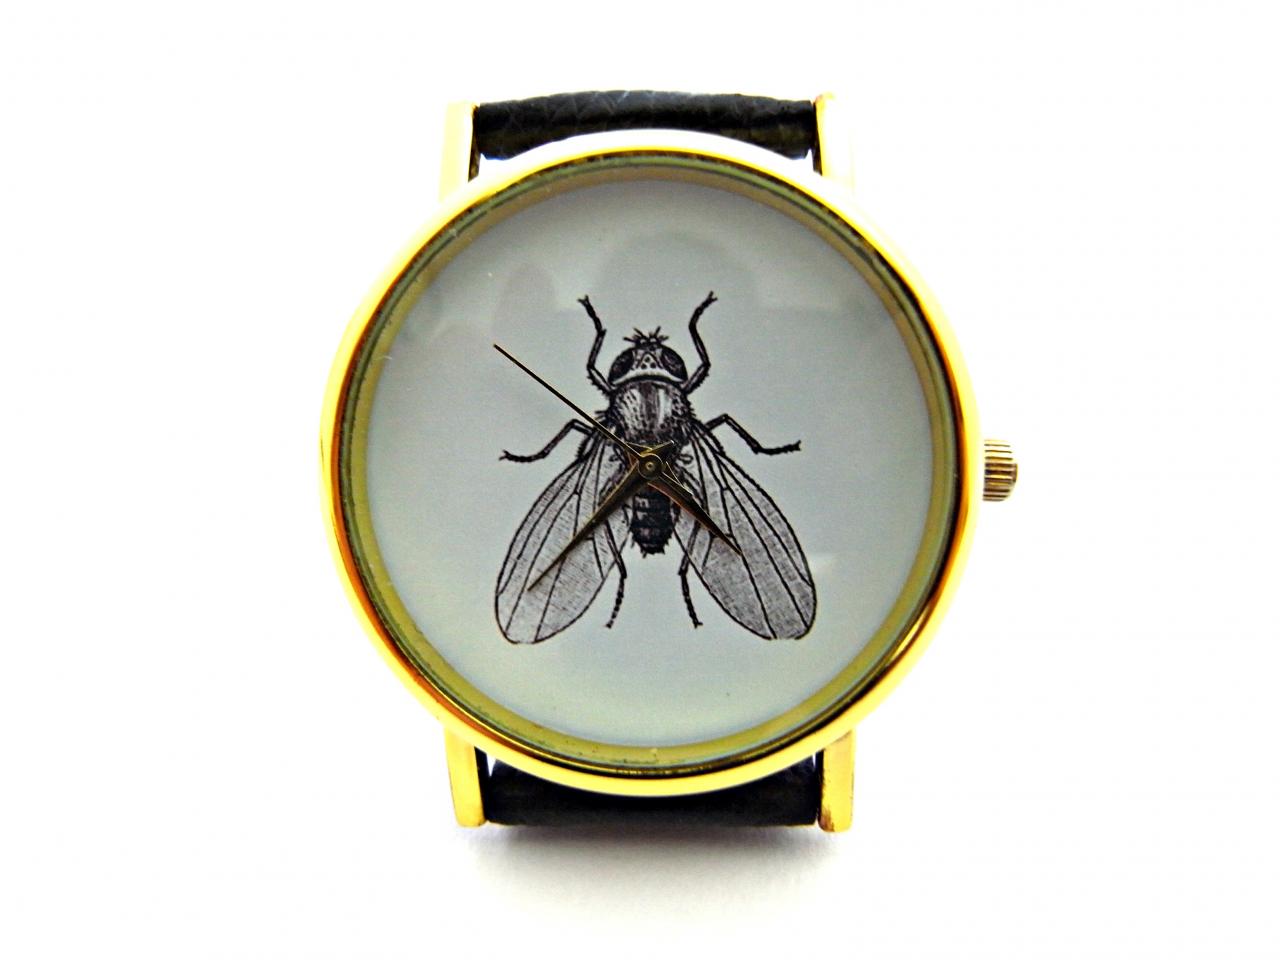 Fly Insect Leather Wrist Watch, Woman Man Lady Unisex Watch, Genuine Leather Handmade Unique Watch #211